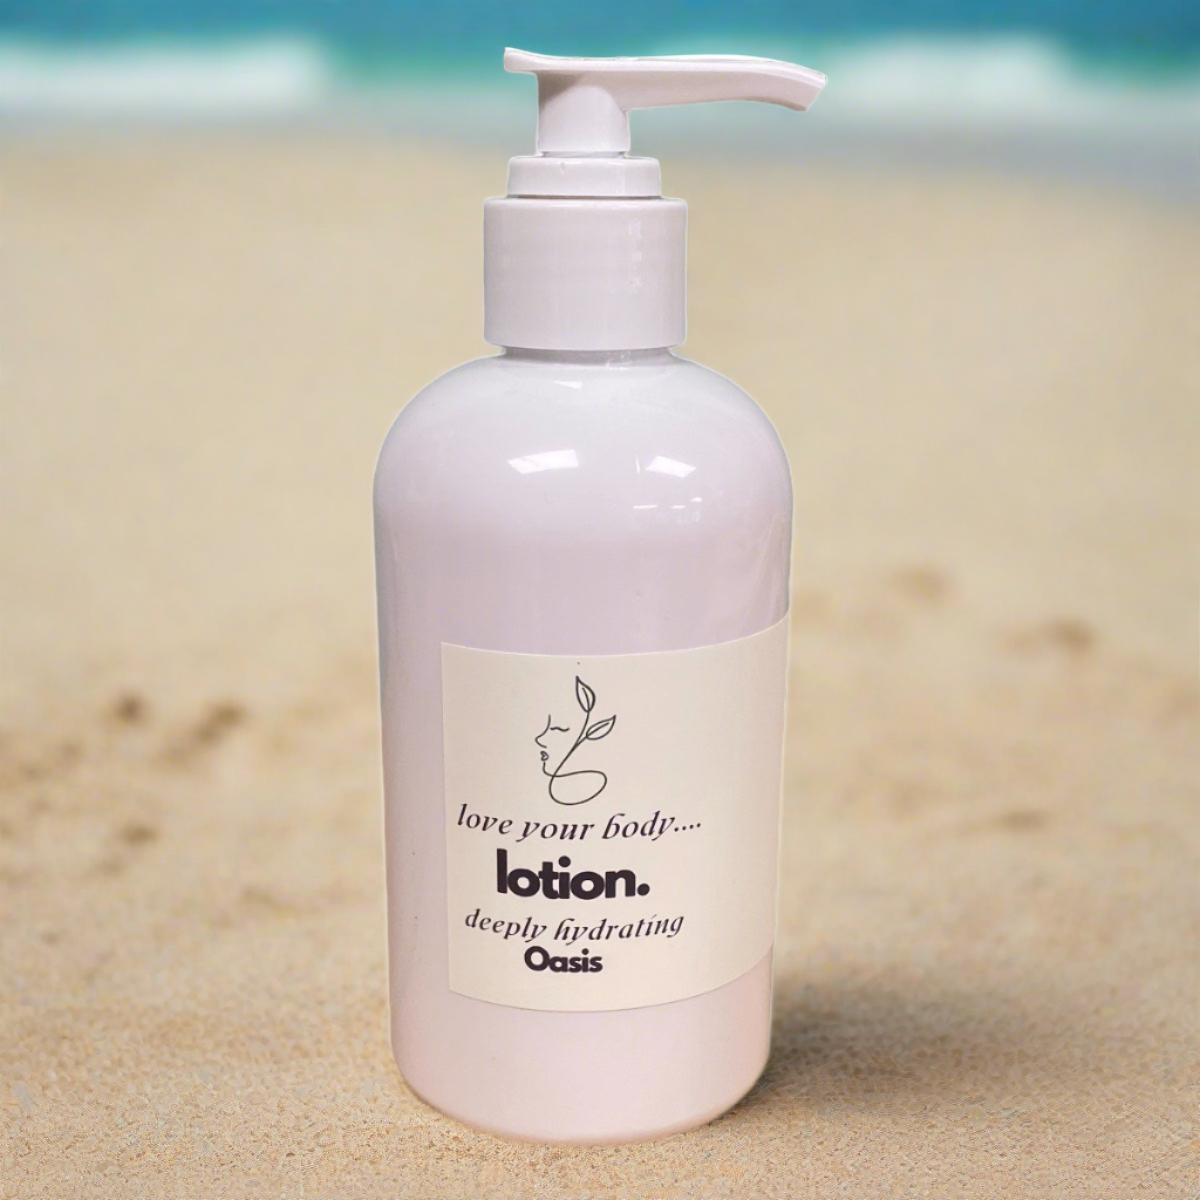 Love Your Body Lotion